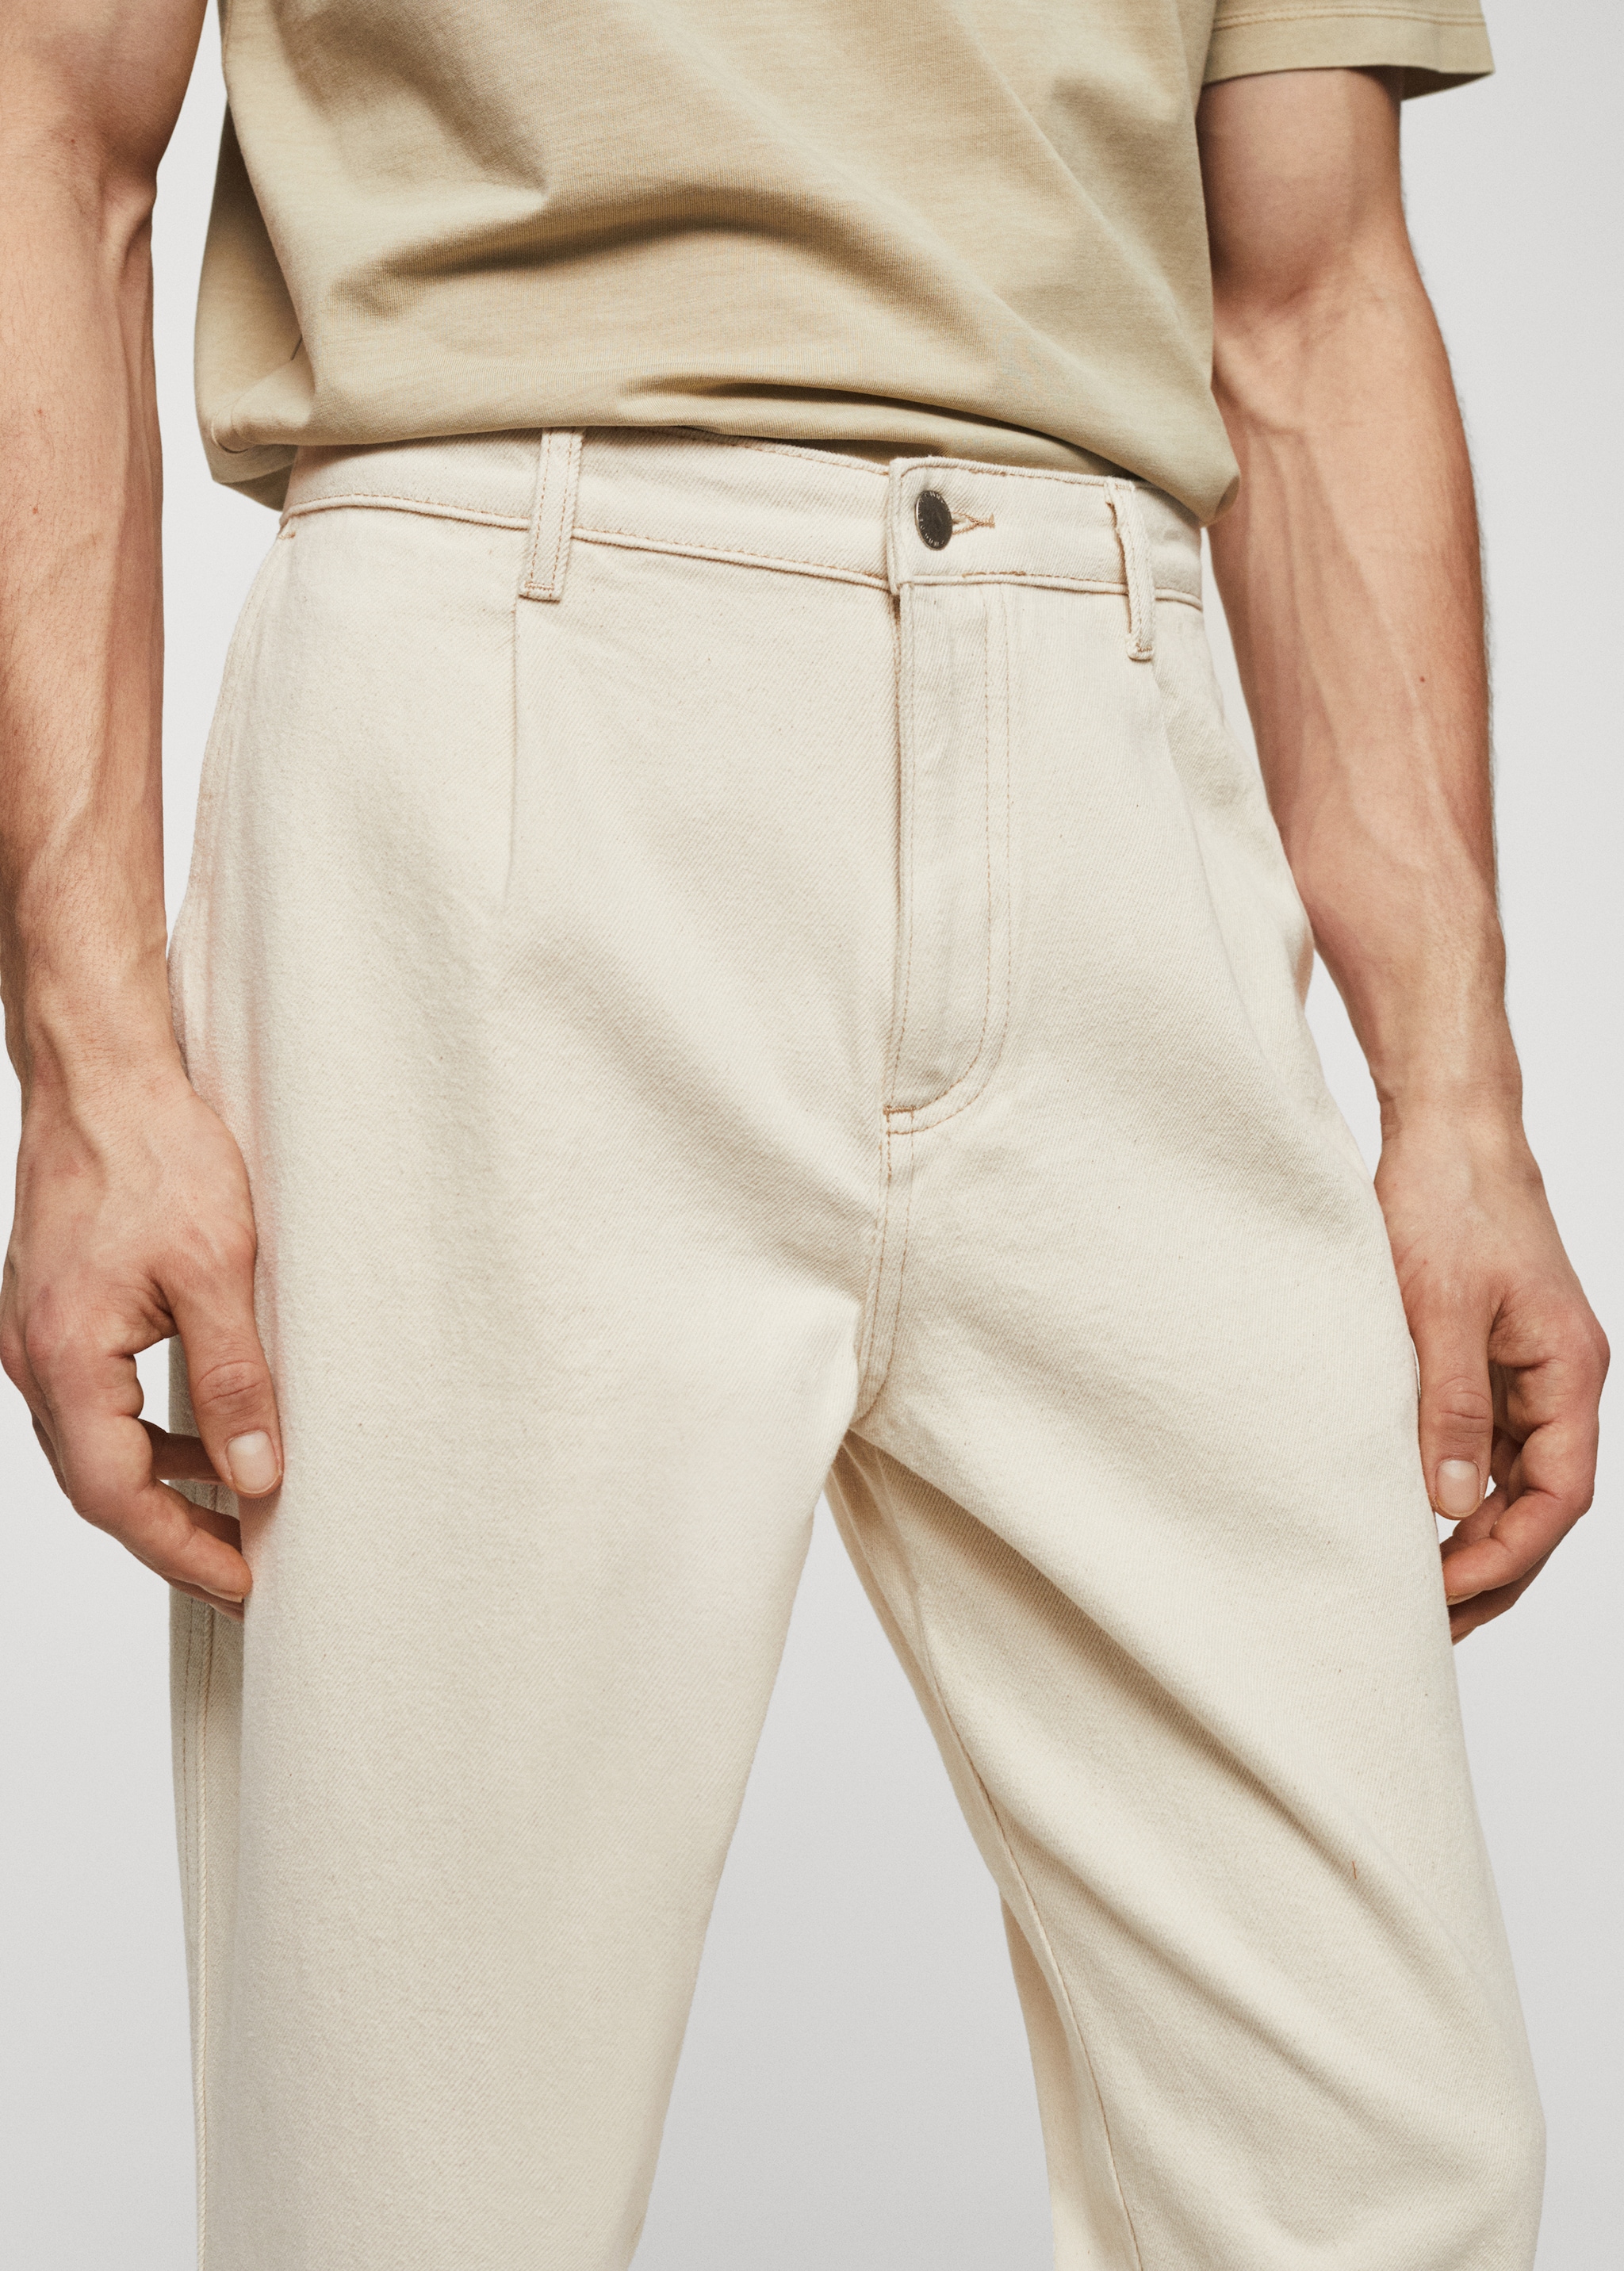 Dart slouchy jeans - Details of the article 1